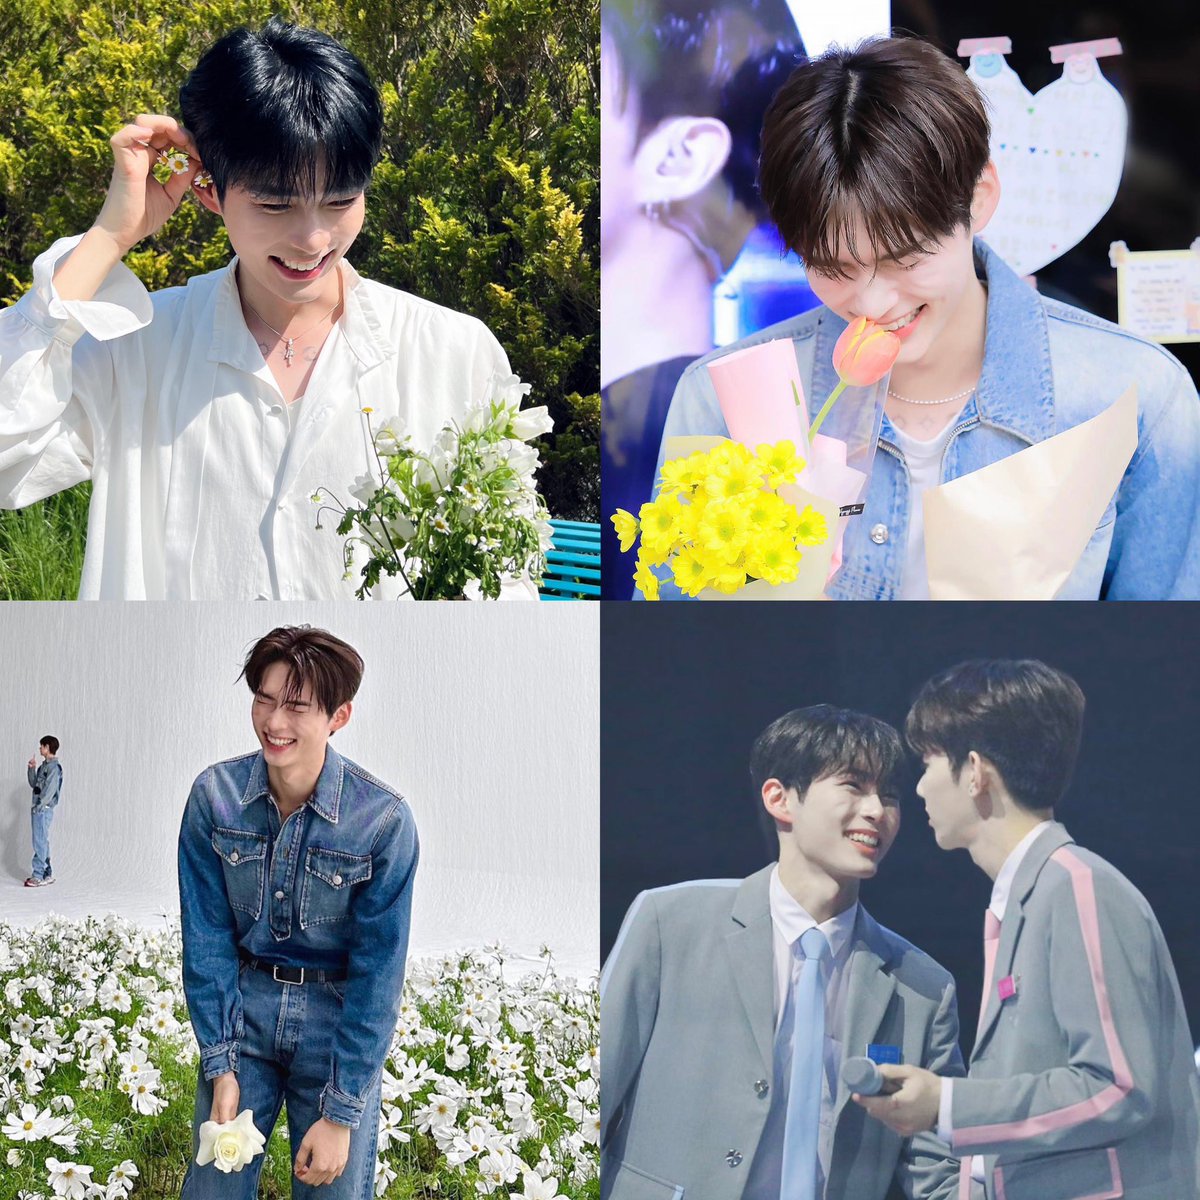 you can always catch hanbin smiling with a flower